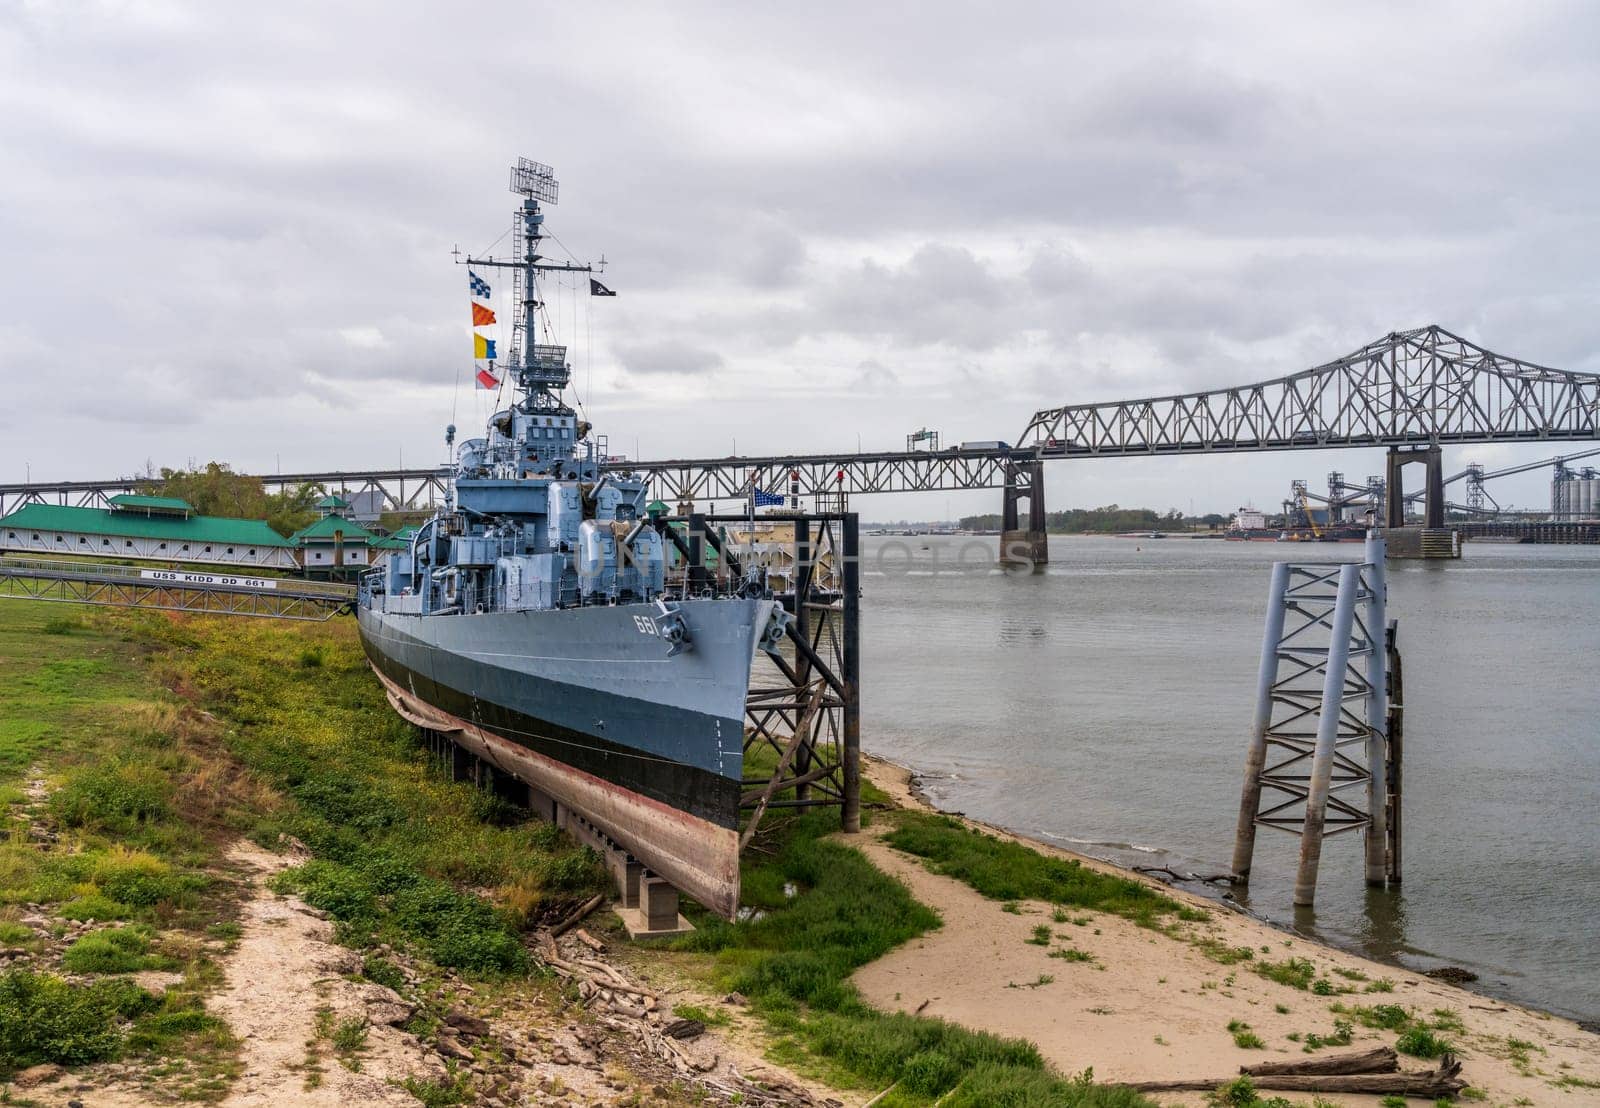 USS Kidd warship beached on the river bank of the Mississippi in low water in Louisiana, LA